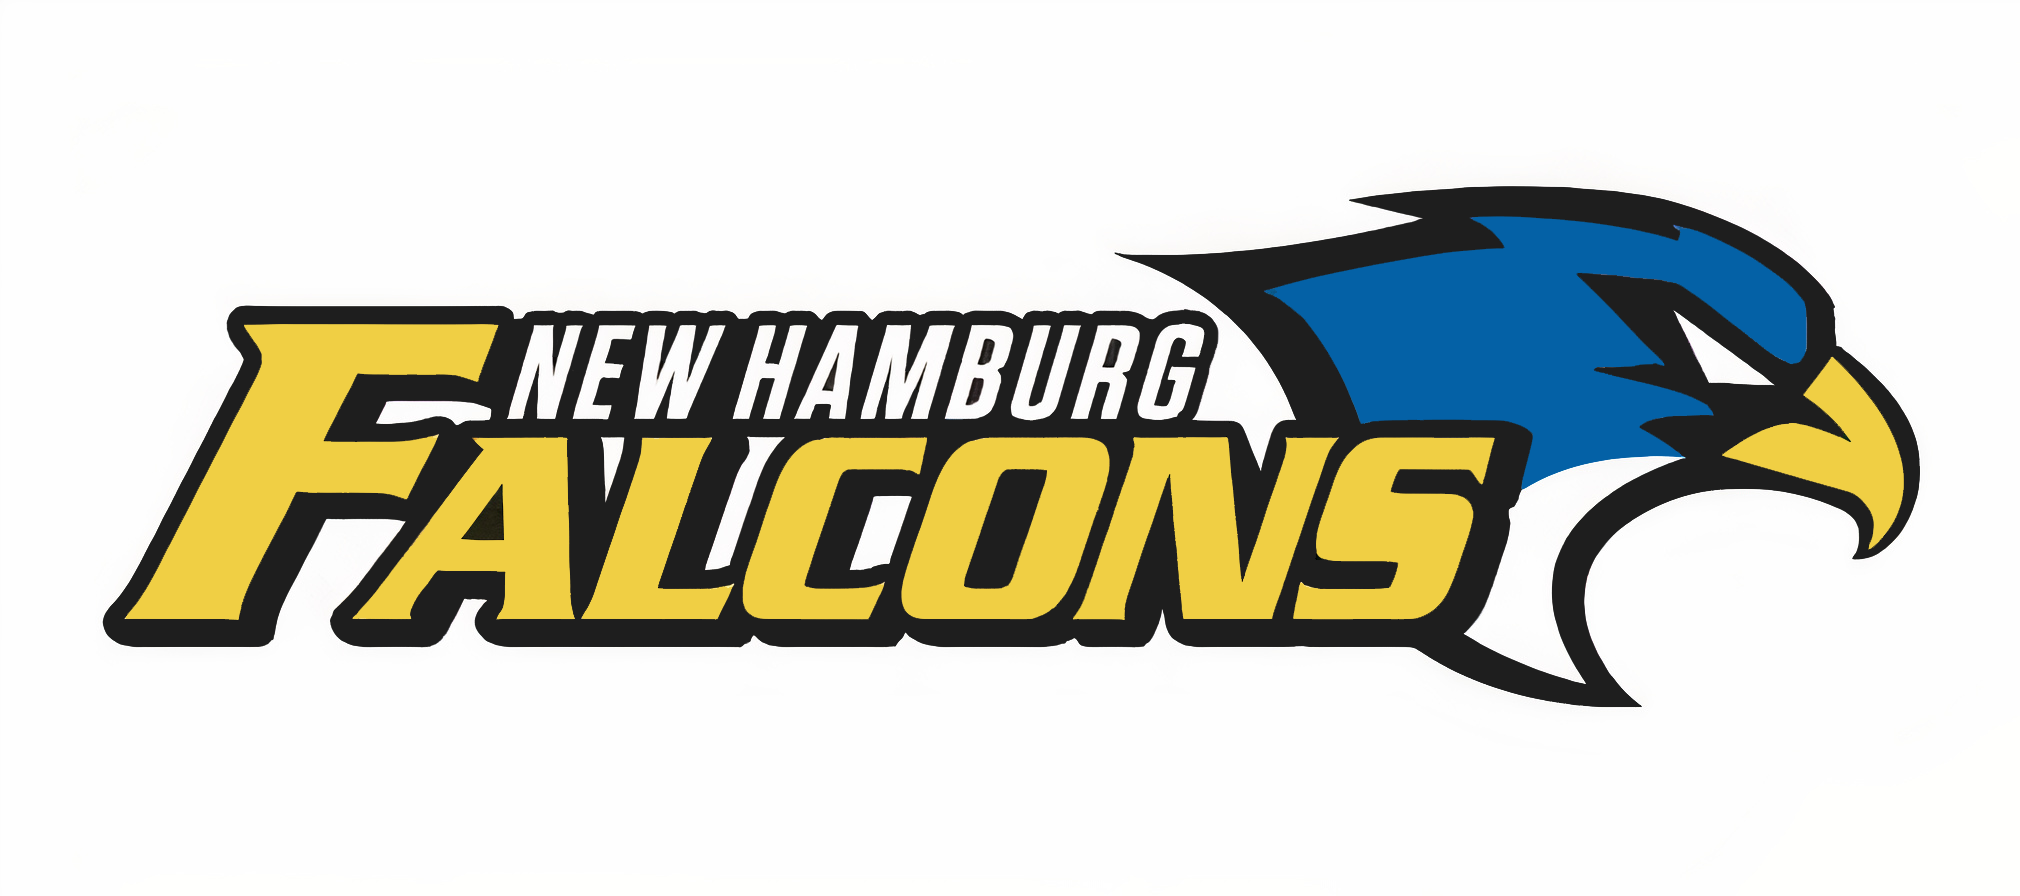 Text reading "New Hamburg Falcons" with blue falcon-head logo behind the letters